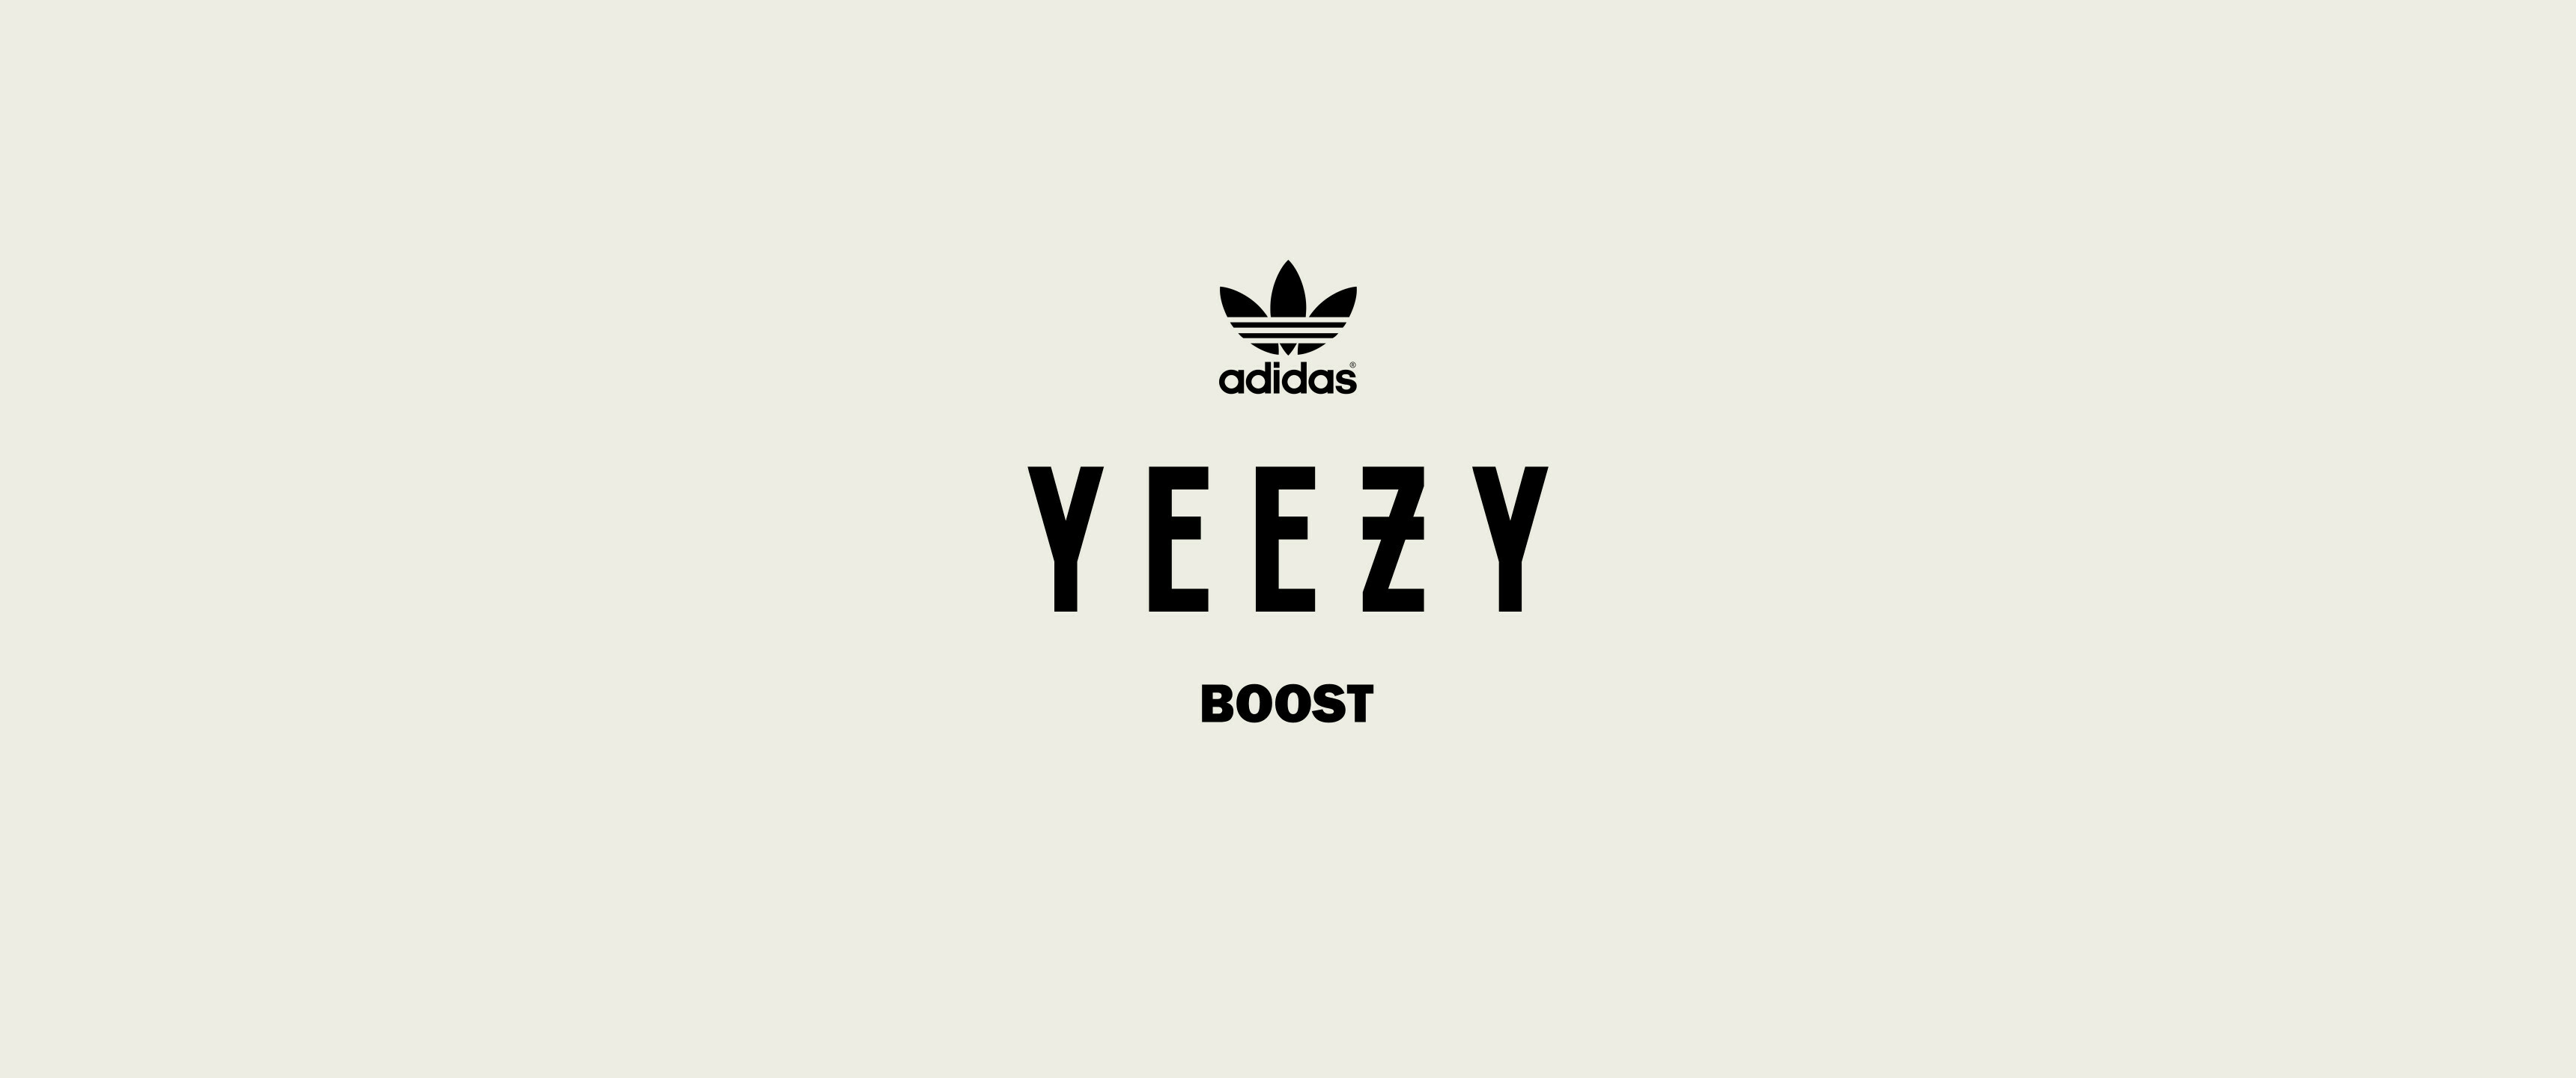 Yeezy: A fashion collaboration between Kanye West and German sportswear company Adidas. 3440x1440 Dual Screen Background.